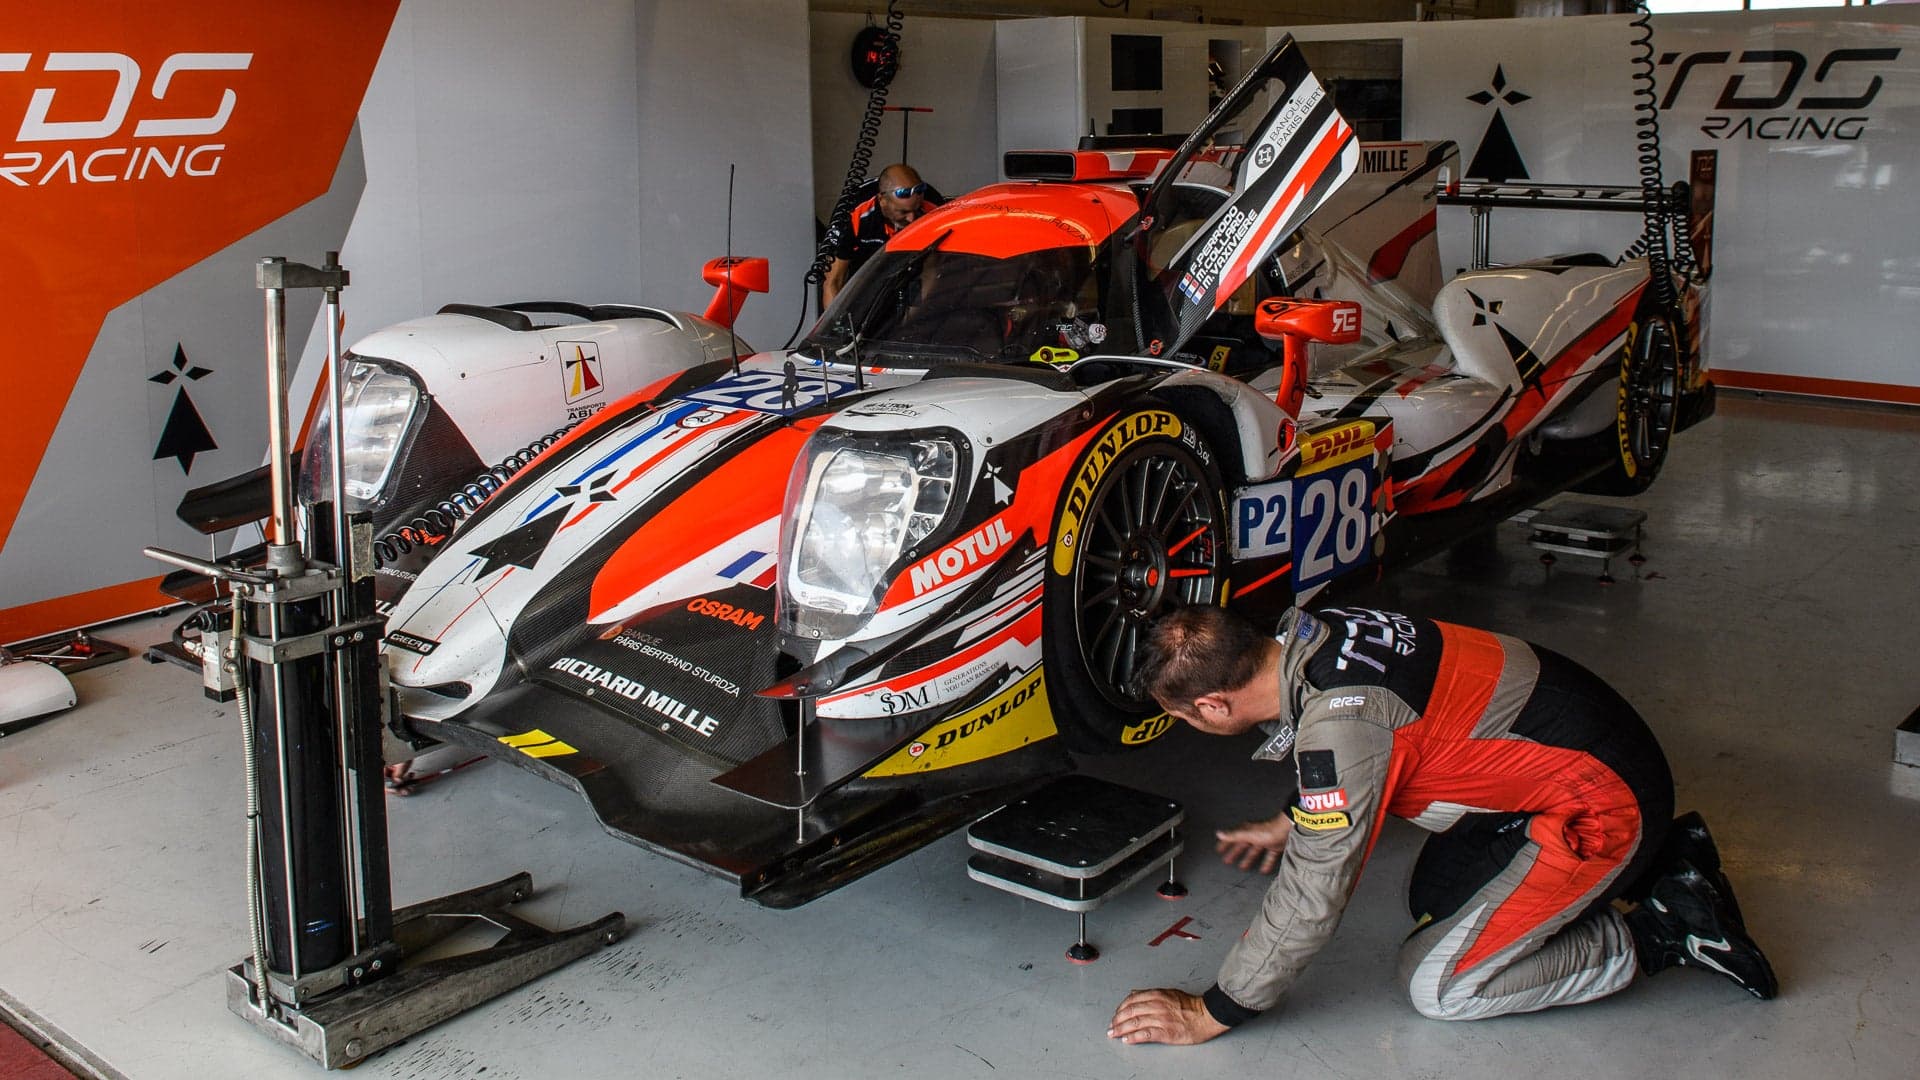 Get to Know the Cars of the World Endurance Championship Running at COTA